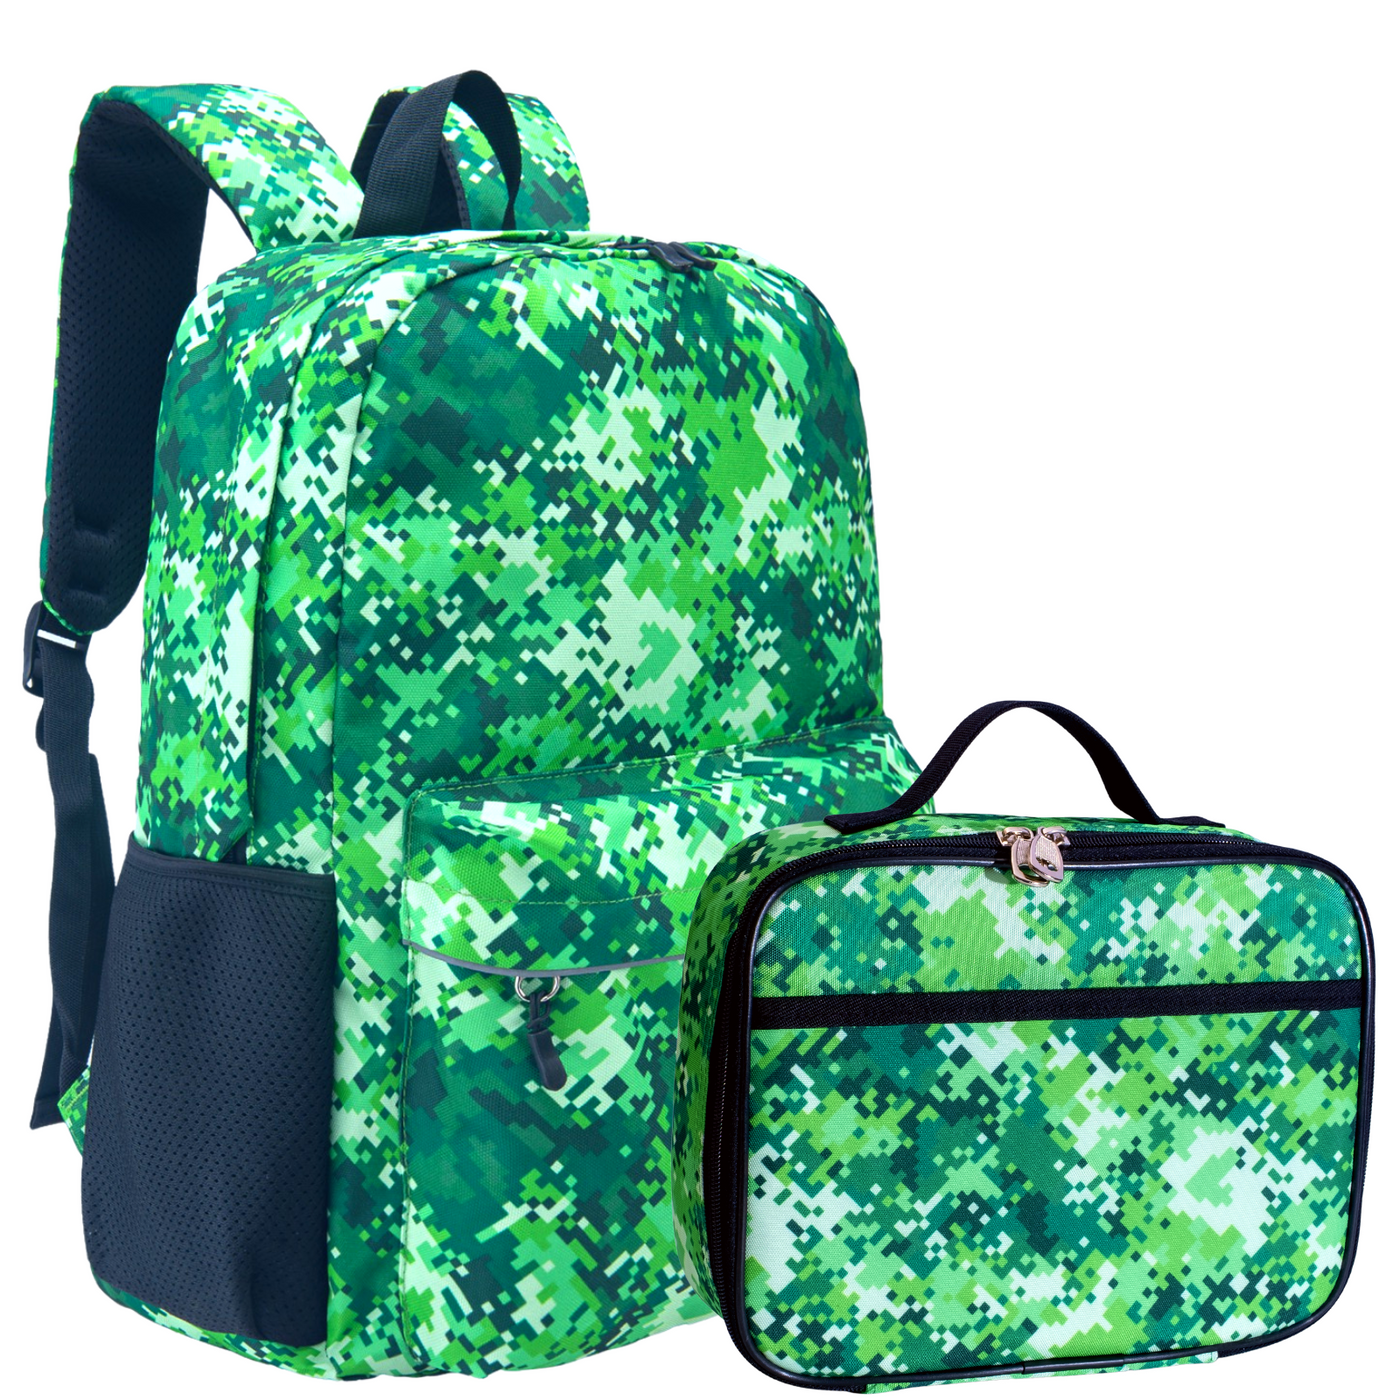 Boys Backpack and Lunch Box Set, Green Pixel, Gives Back to Great